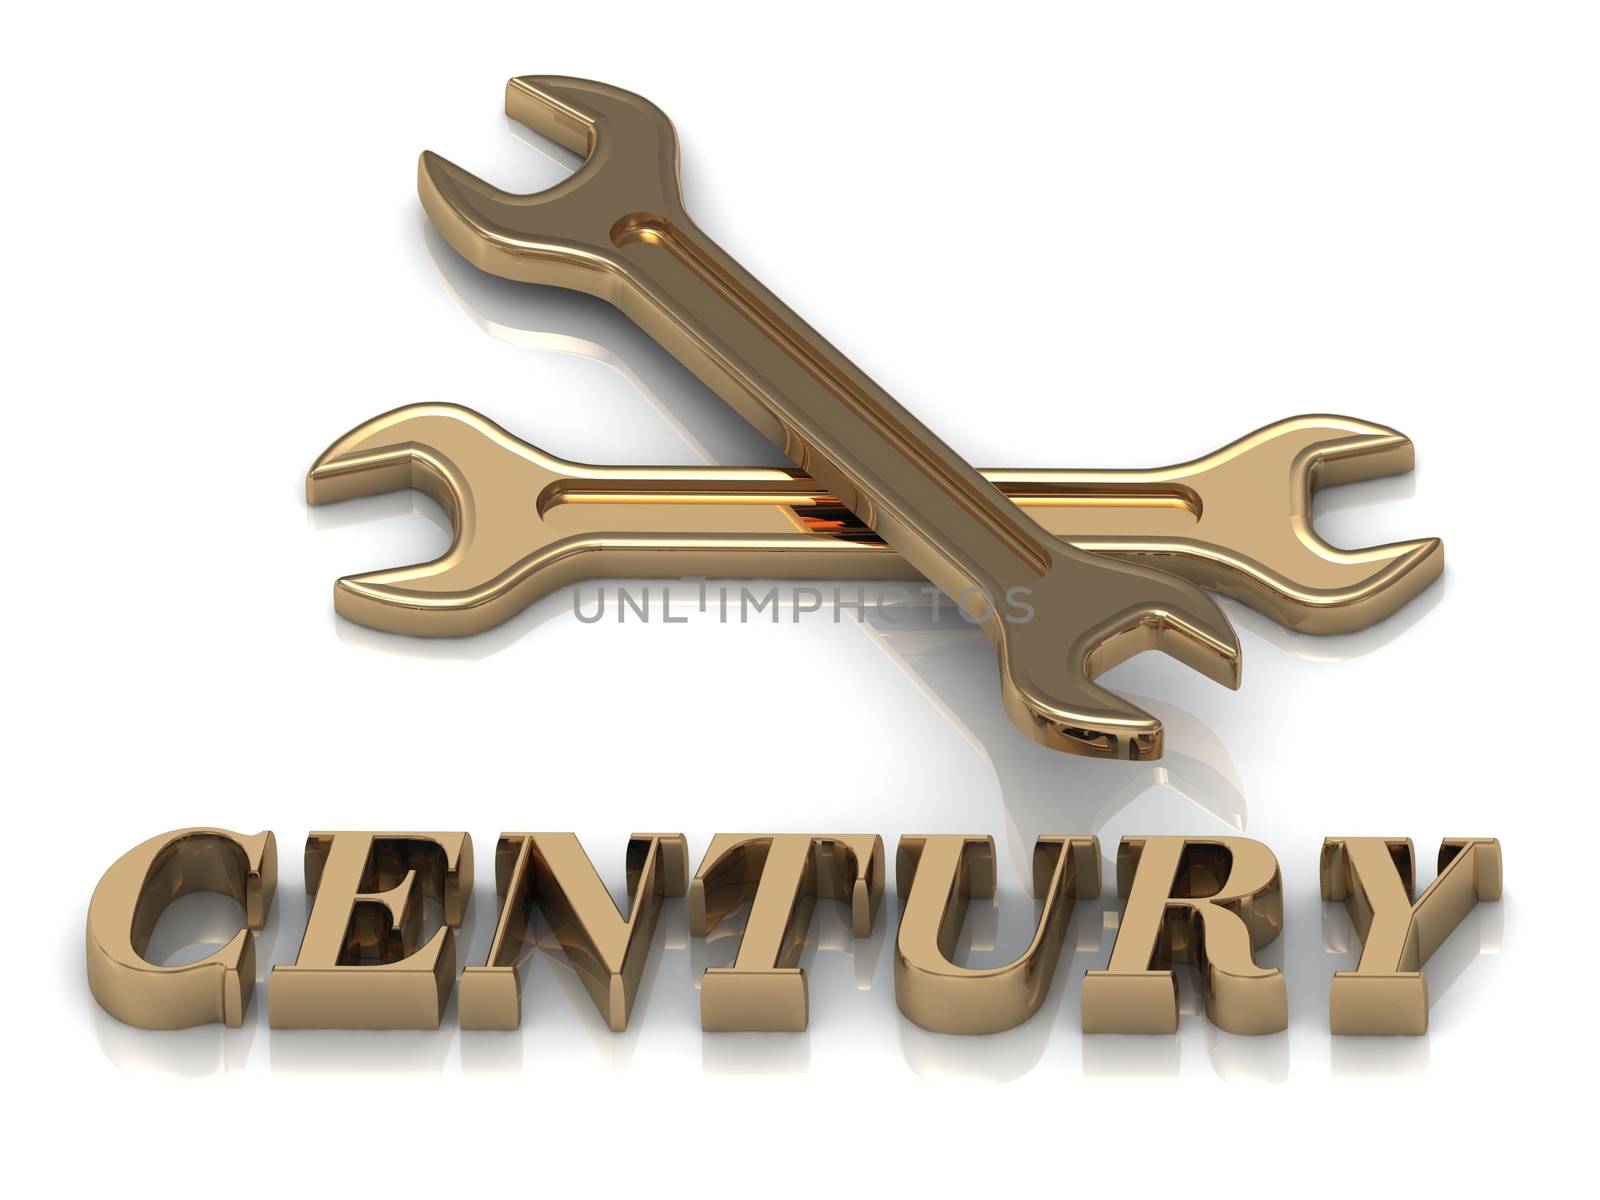 CENTURY- inscription of metal letters and 2 keys on white background